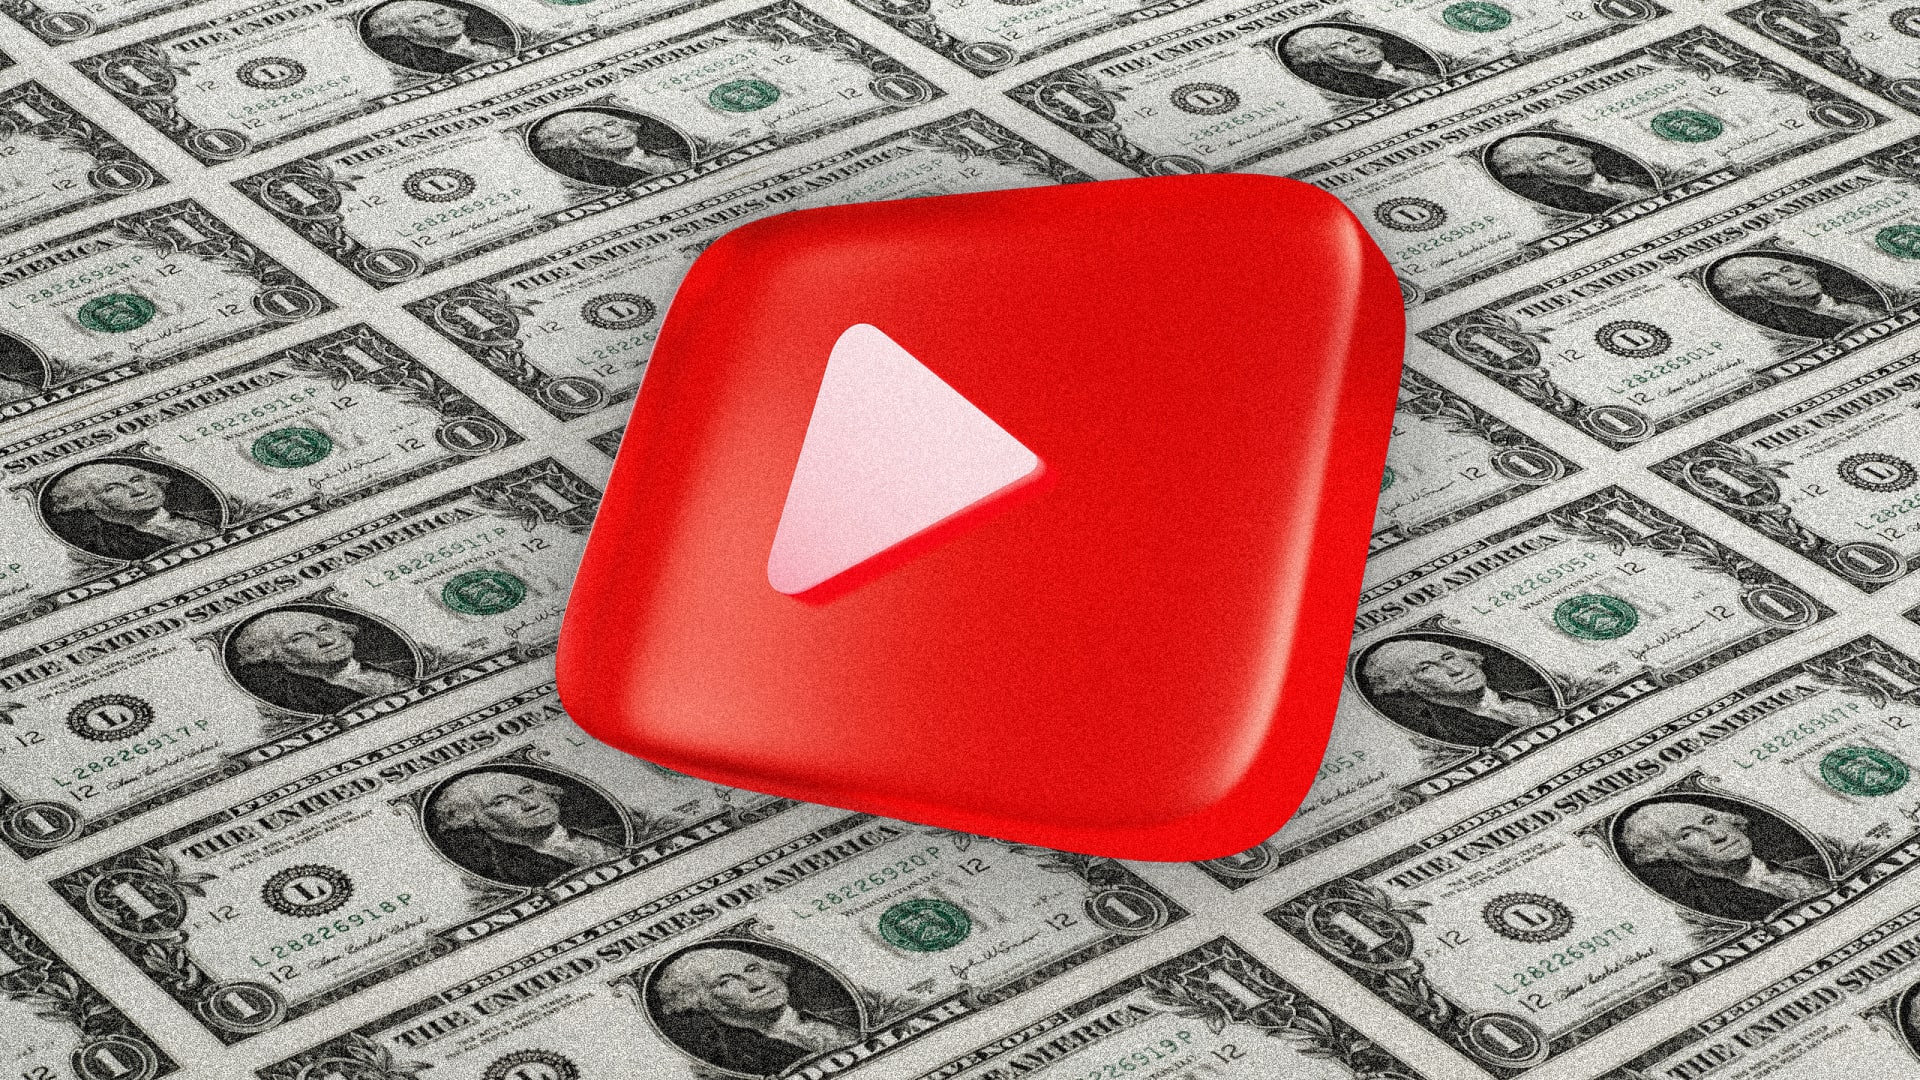 YouTube Premium subscribers shocked as sudden price hikes announced for family plan